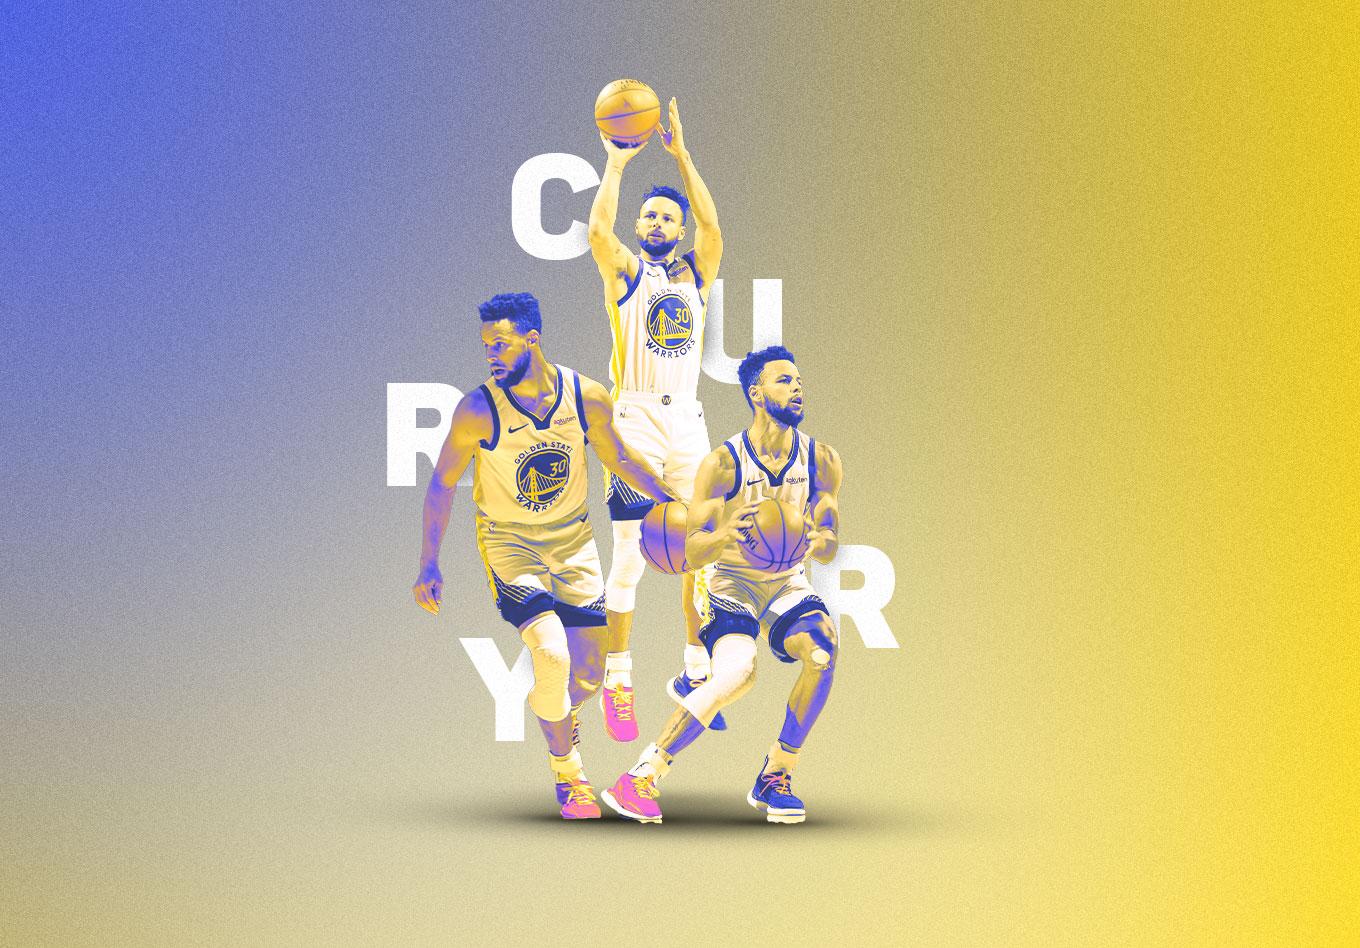 A Look At Steph Curry And His Historic April For The Warriors